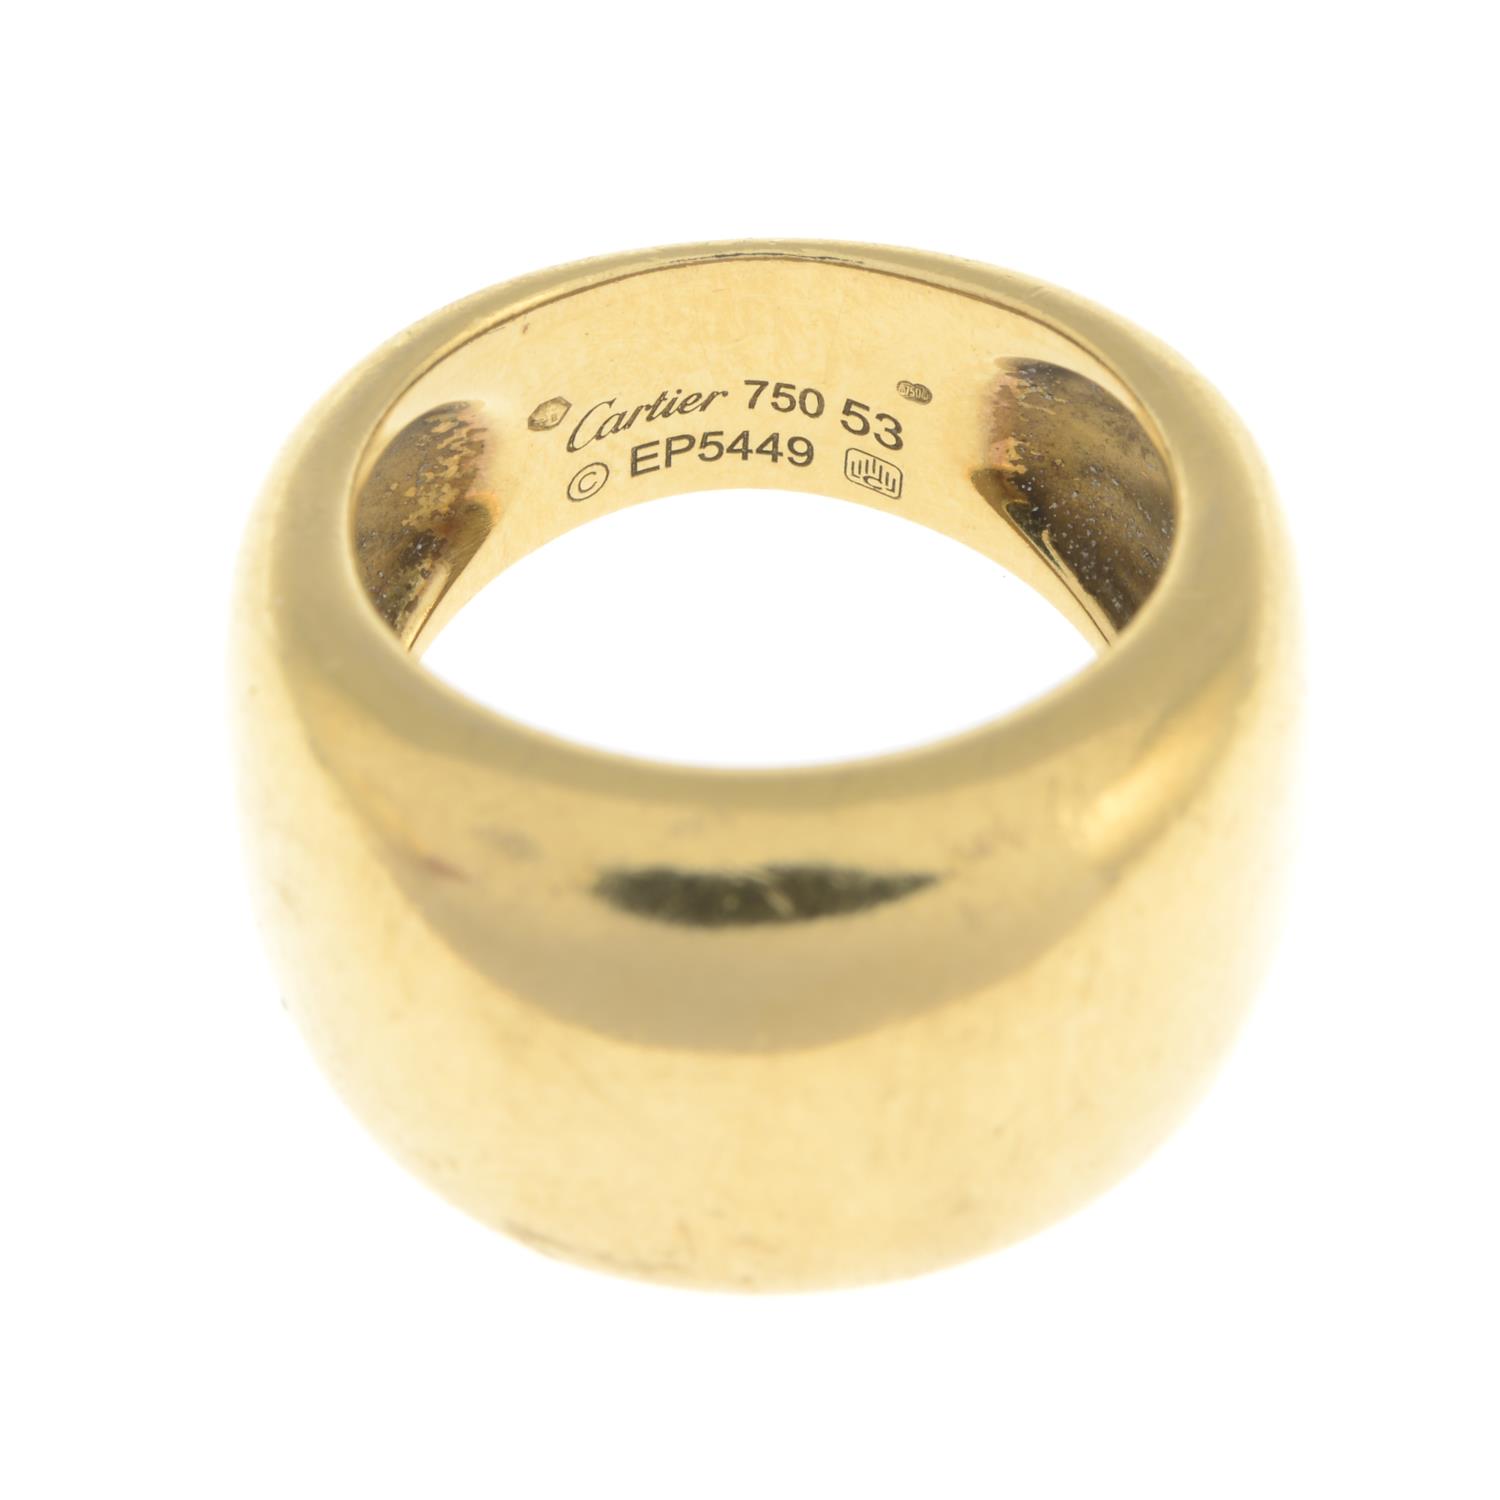 CARTIER - an 18ct gold 'Nouvelle Vague' ring. - Image 3 of 4